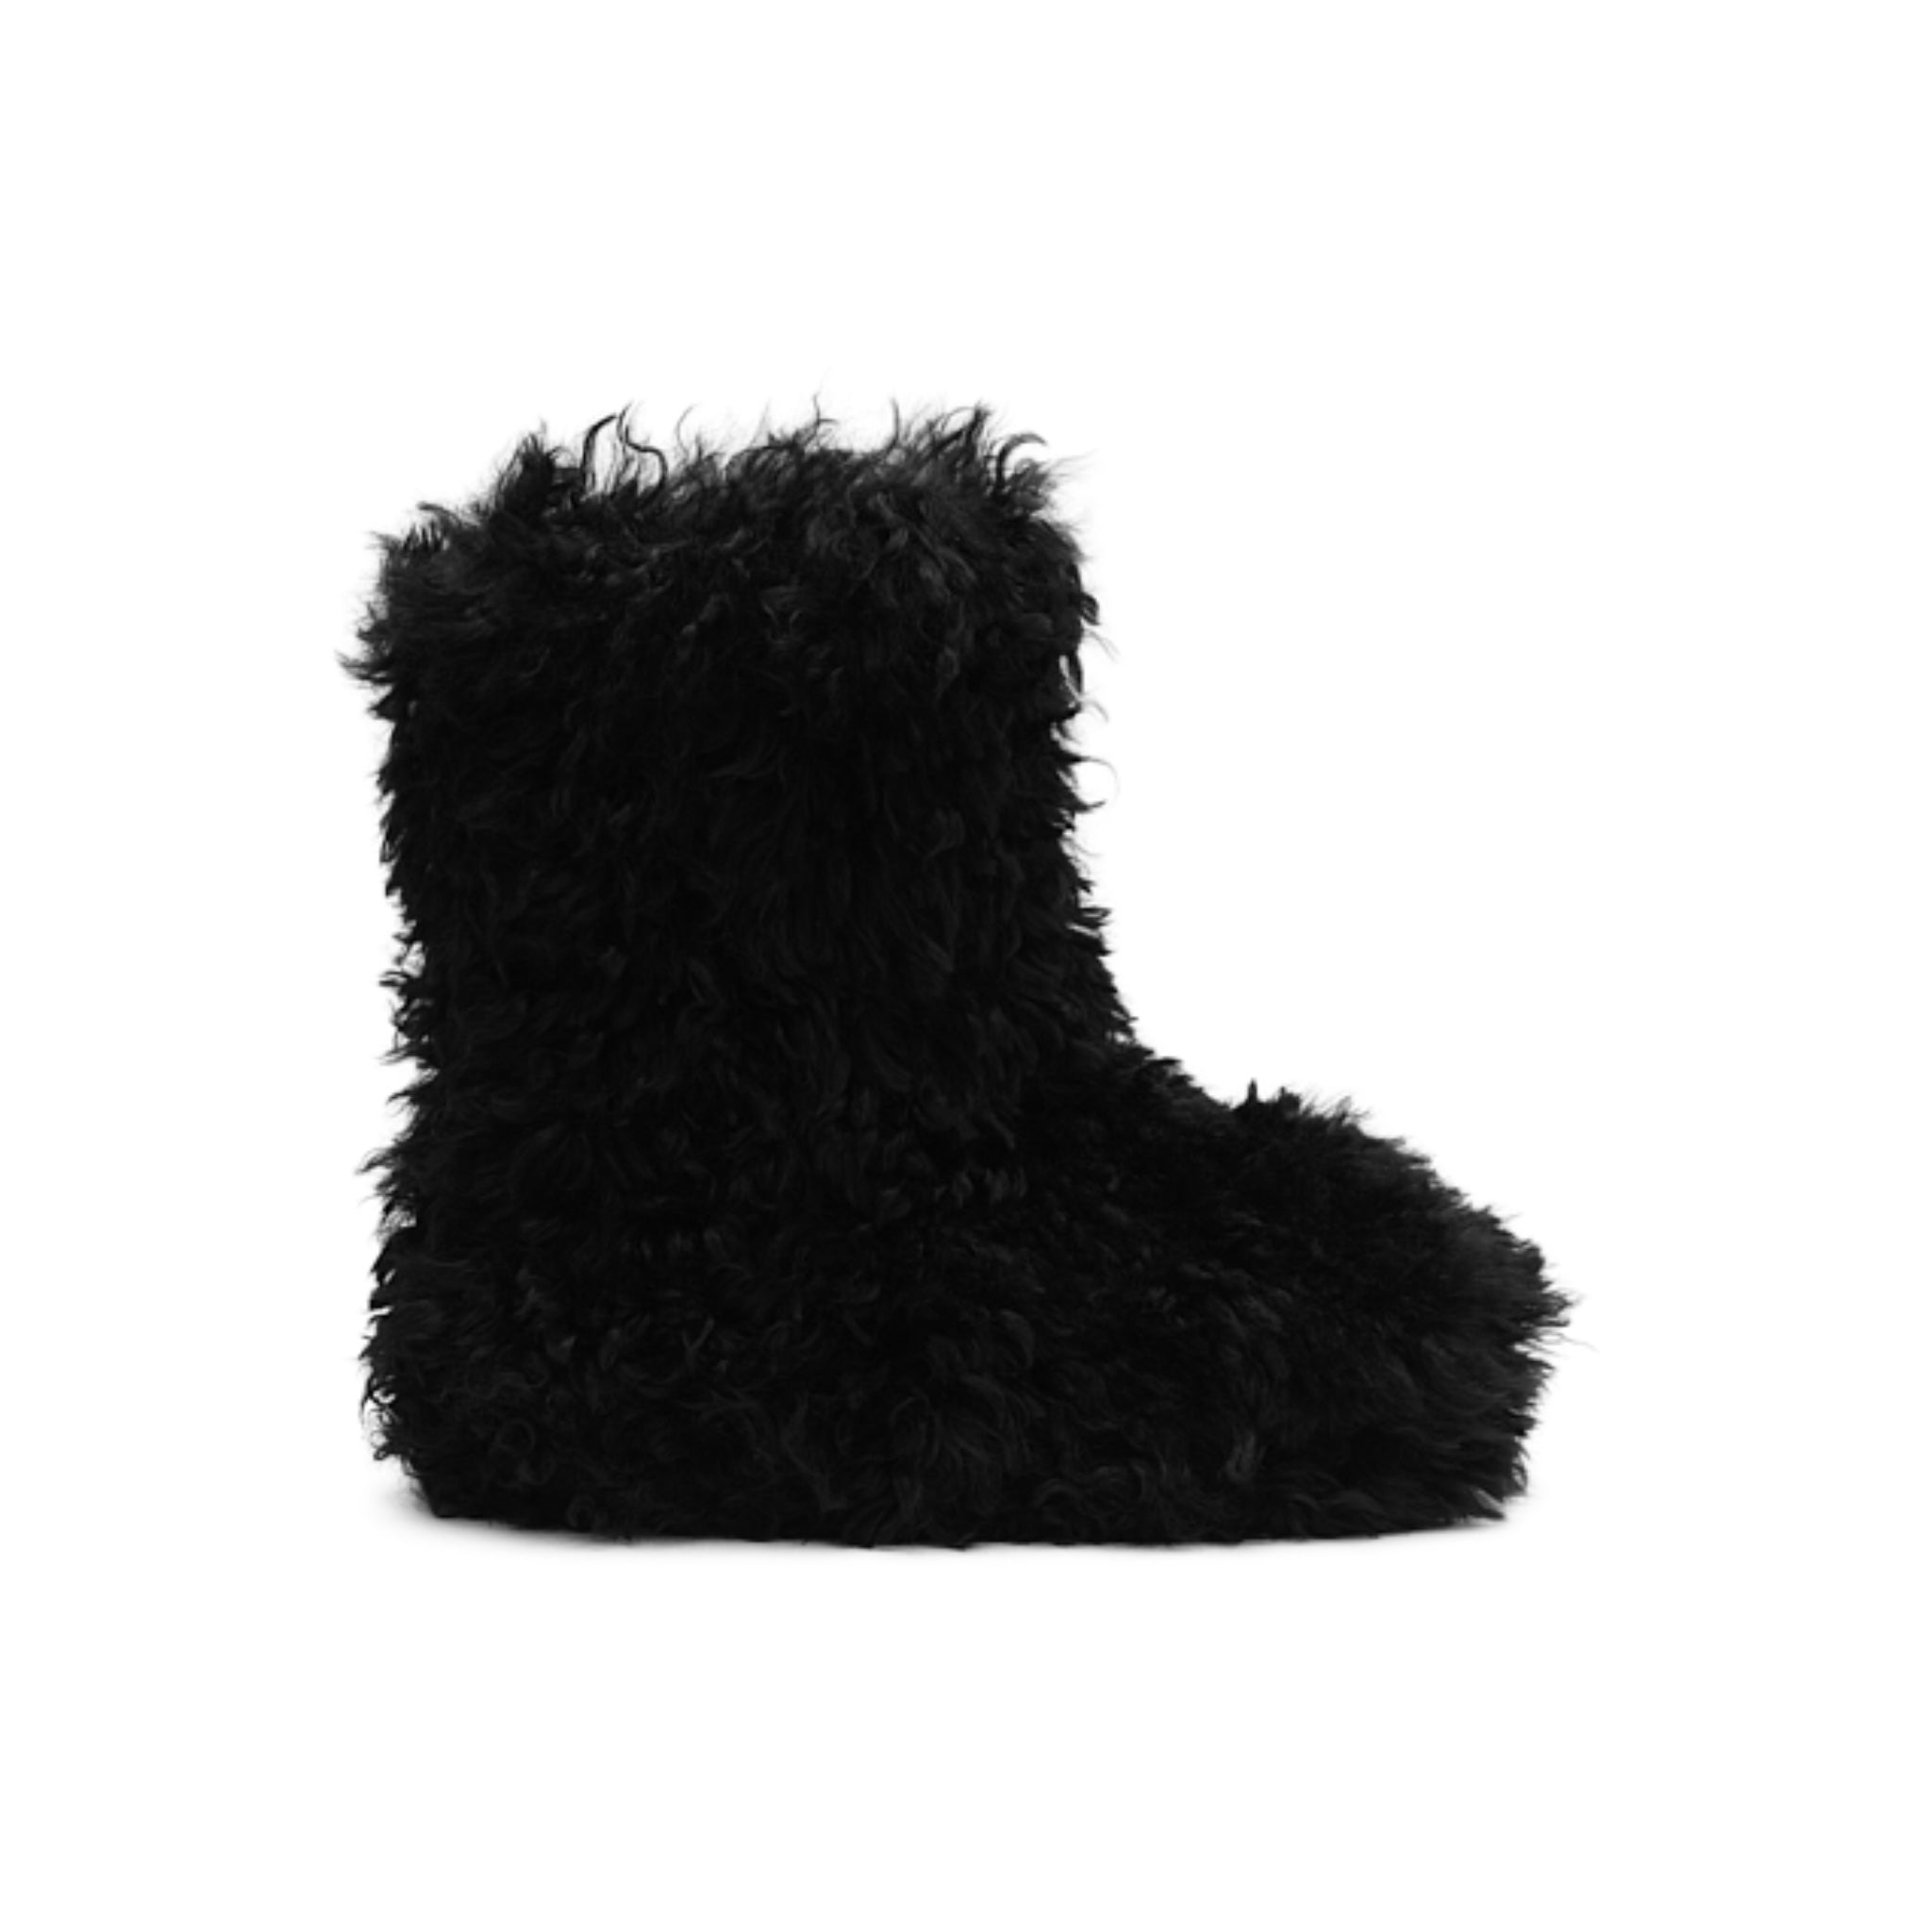 SMFK Compass Furry Snowman Tall Boots | MADA IN CHINA